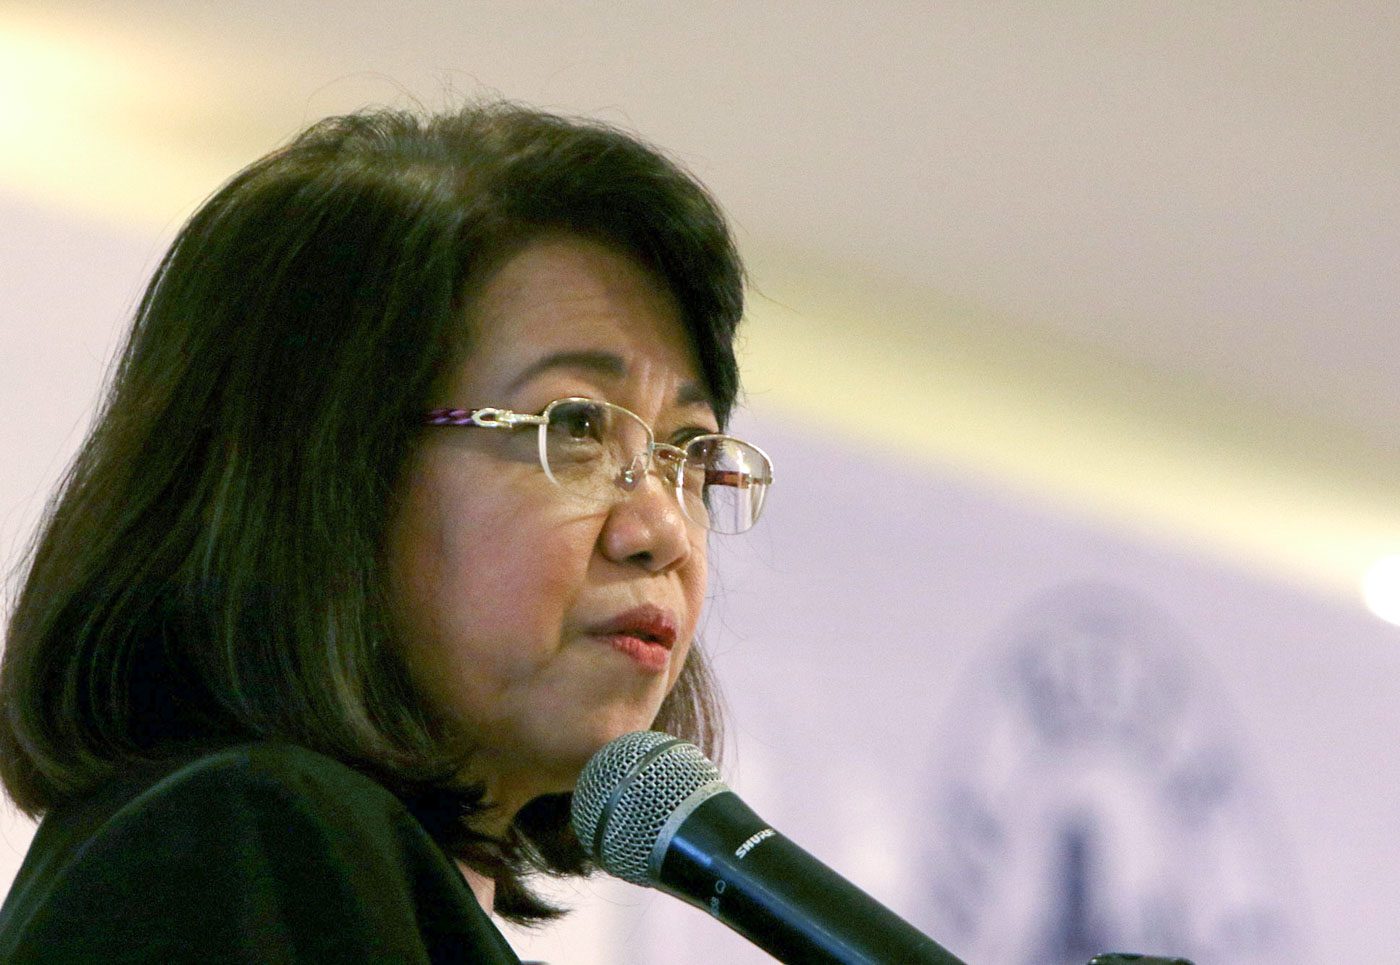 SC in focus: Sereno says quo warranto gravest wound inflicted on Constitution